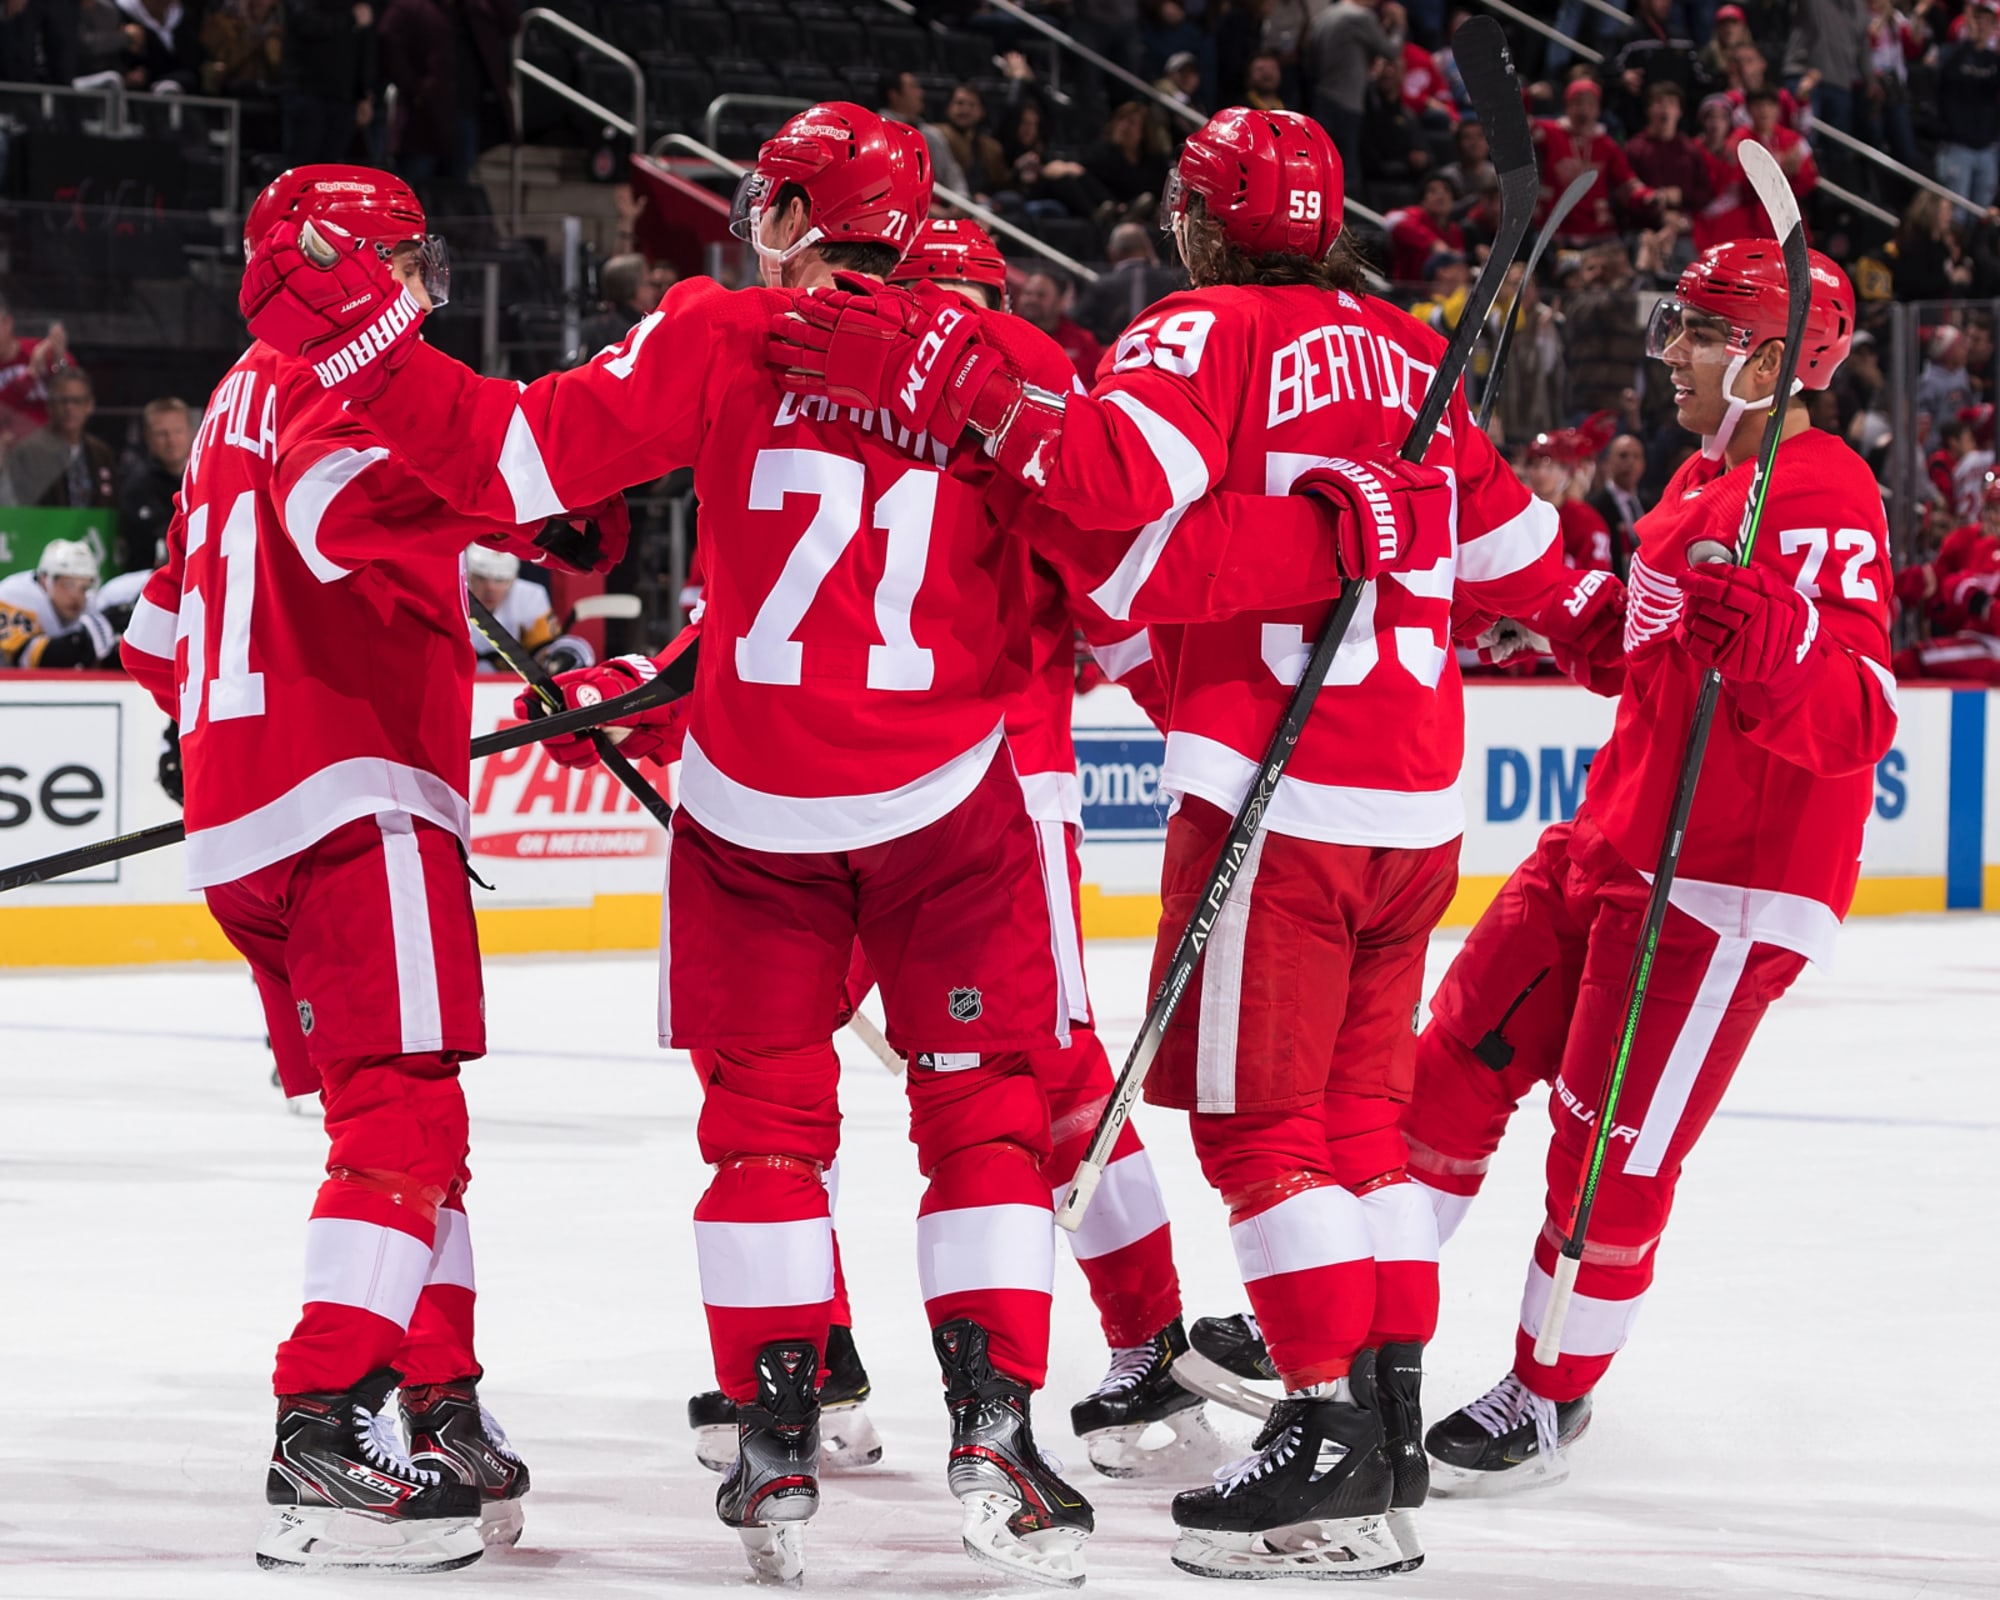 Detroit Red Wings: Top 3 ways to fix the broken franchise